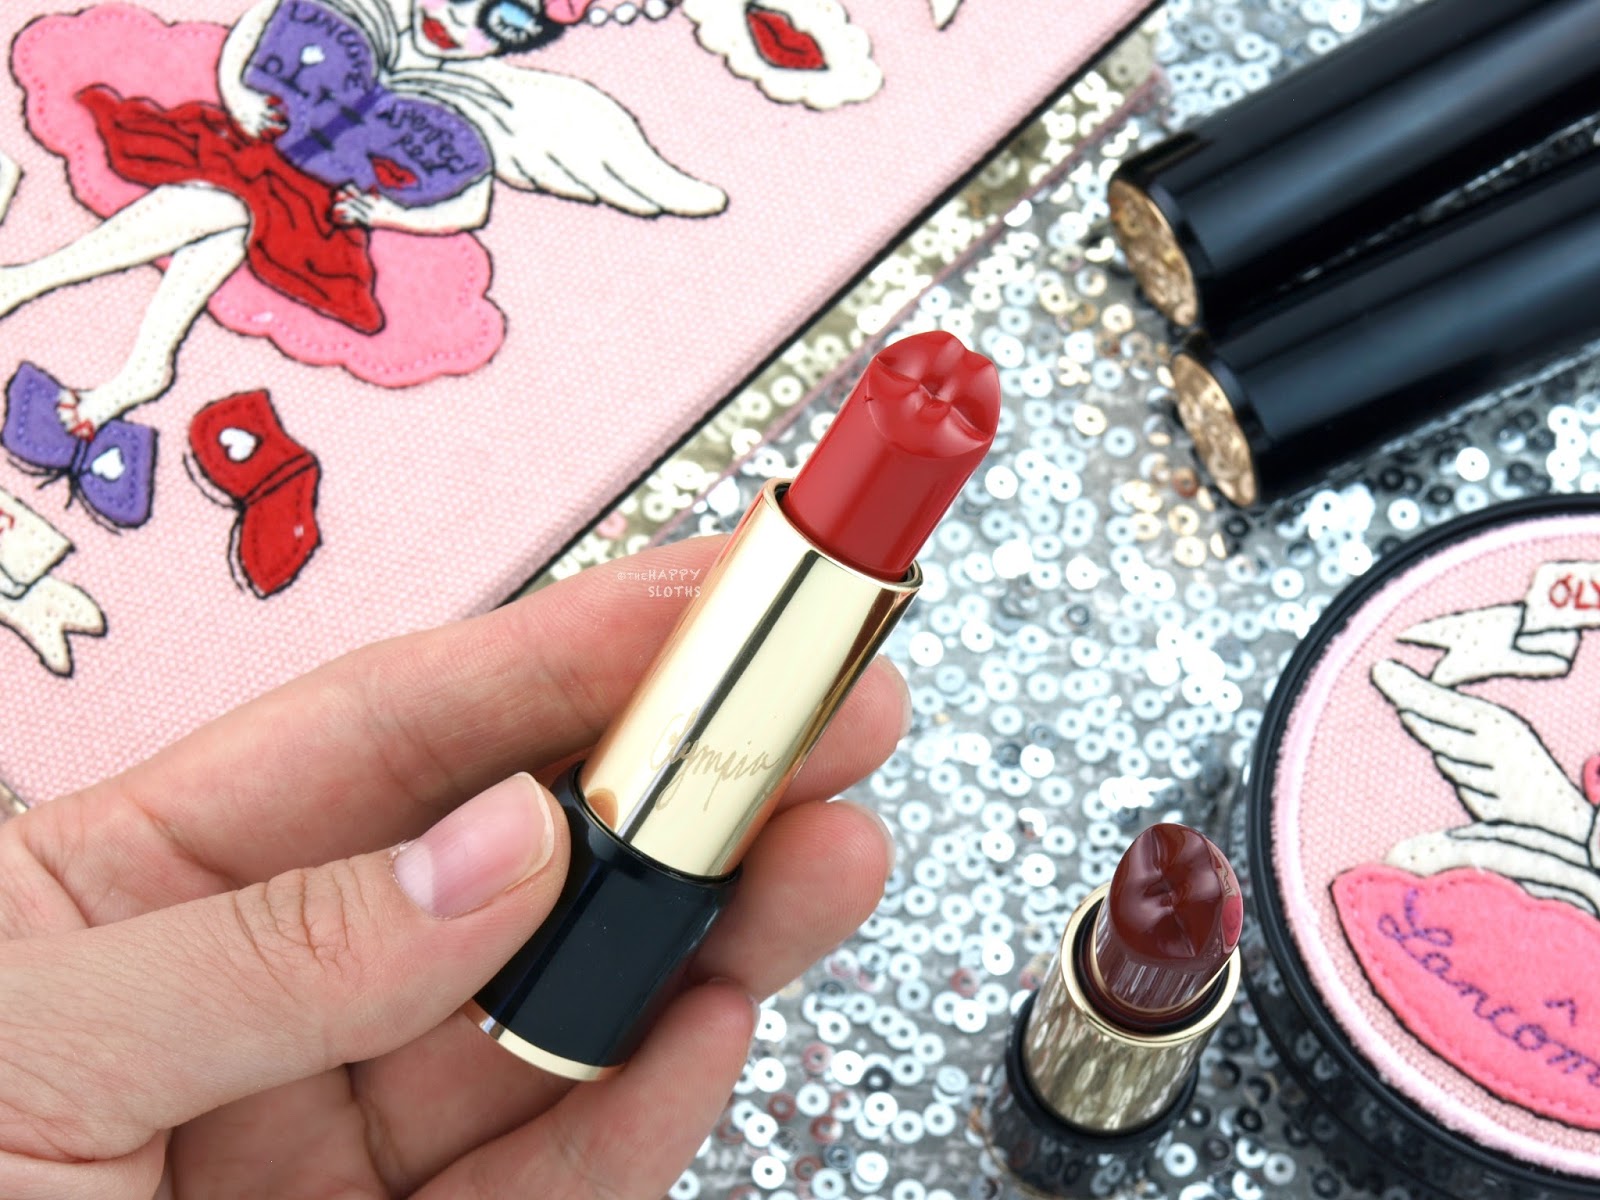 Lancome x Olympia Le-Tan | L'Absolu Rouge Le Bisou Lipstick: Review and Swatches